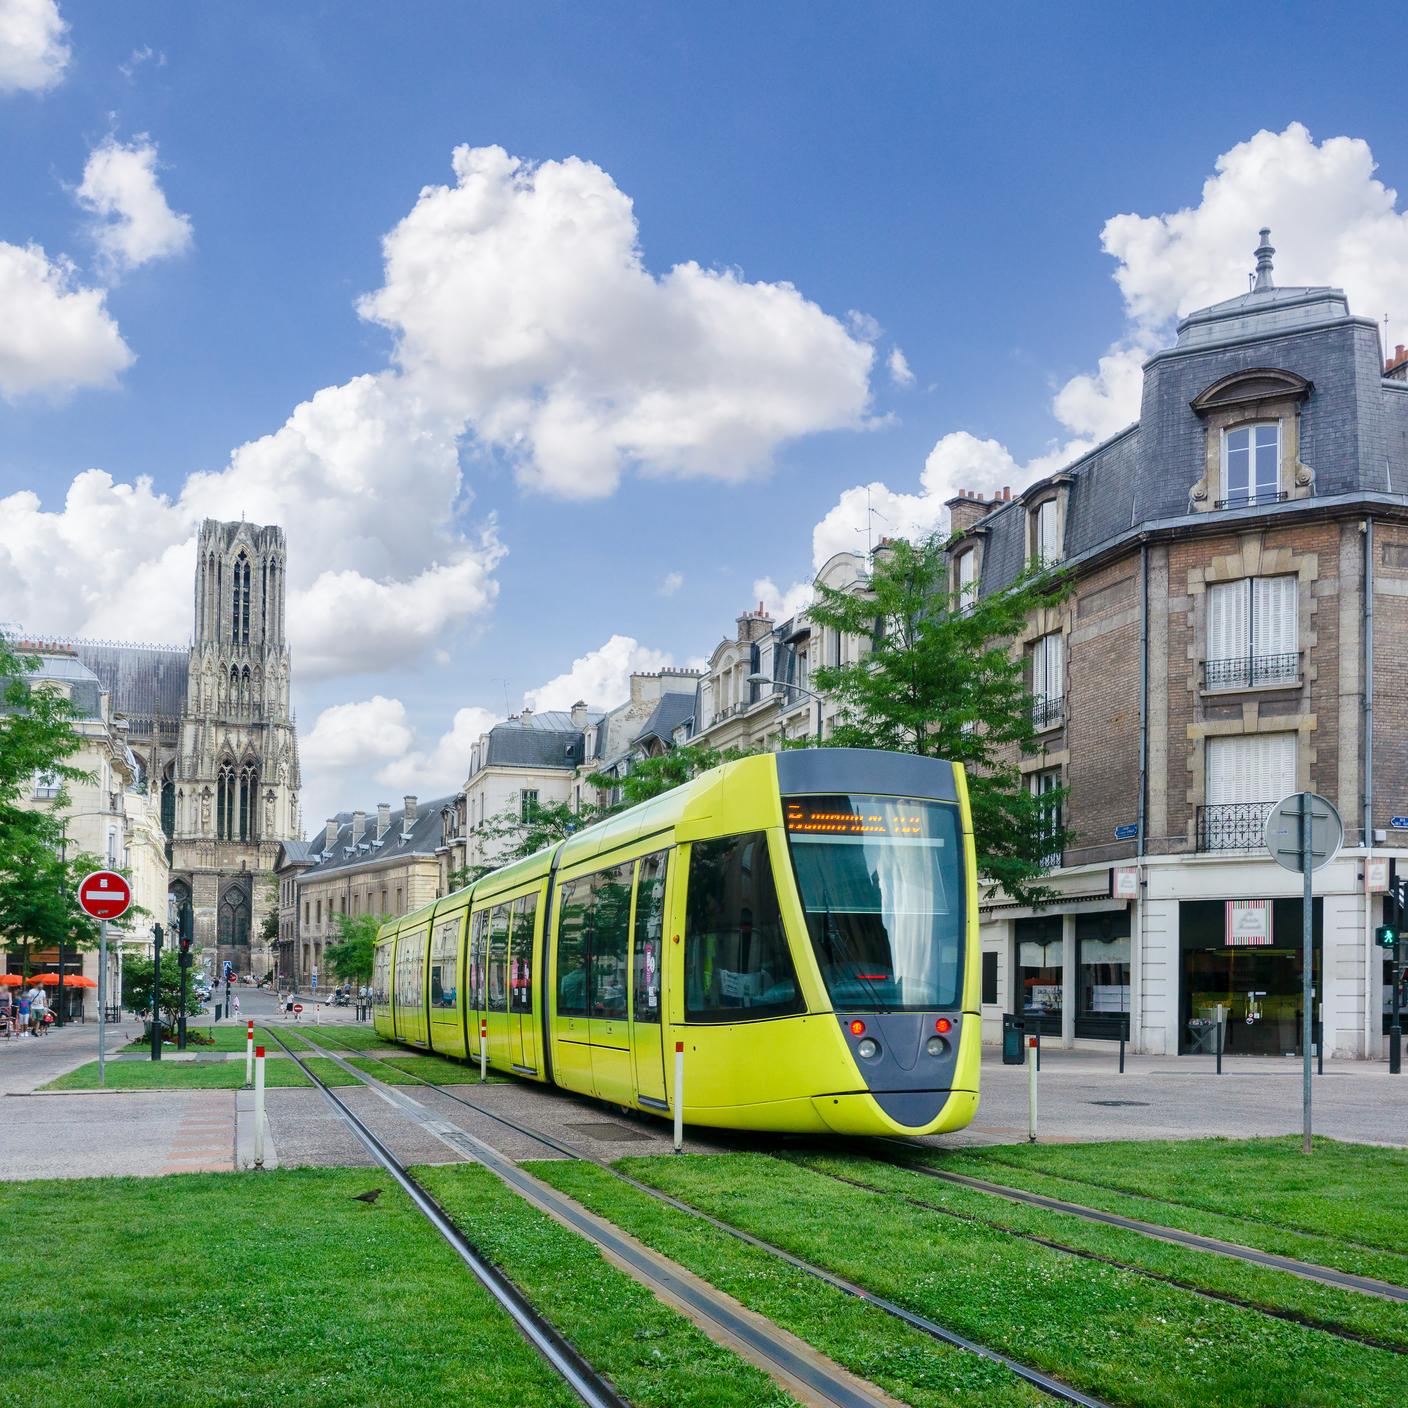 Trams run thru the streets of Reims, which is located in the Champagne-Ardenne region of France